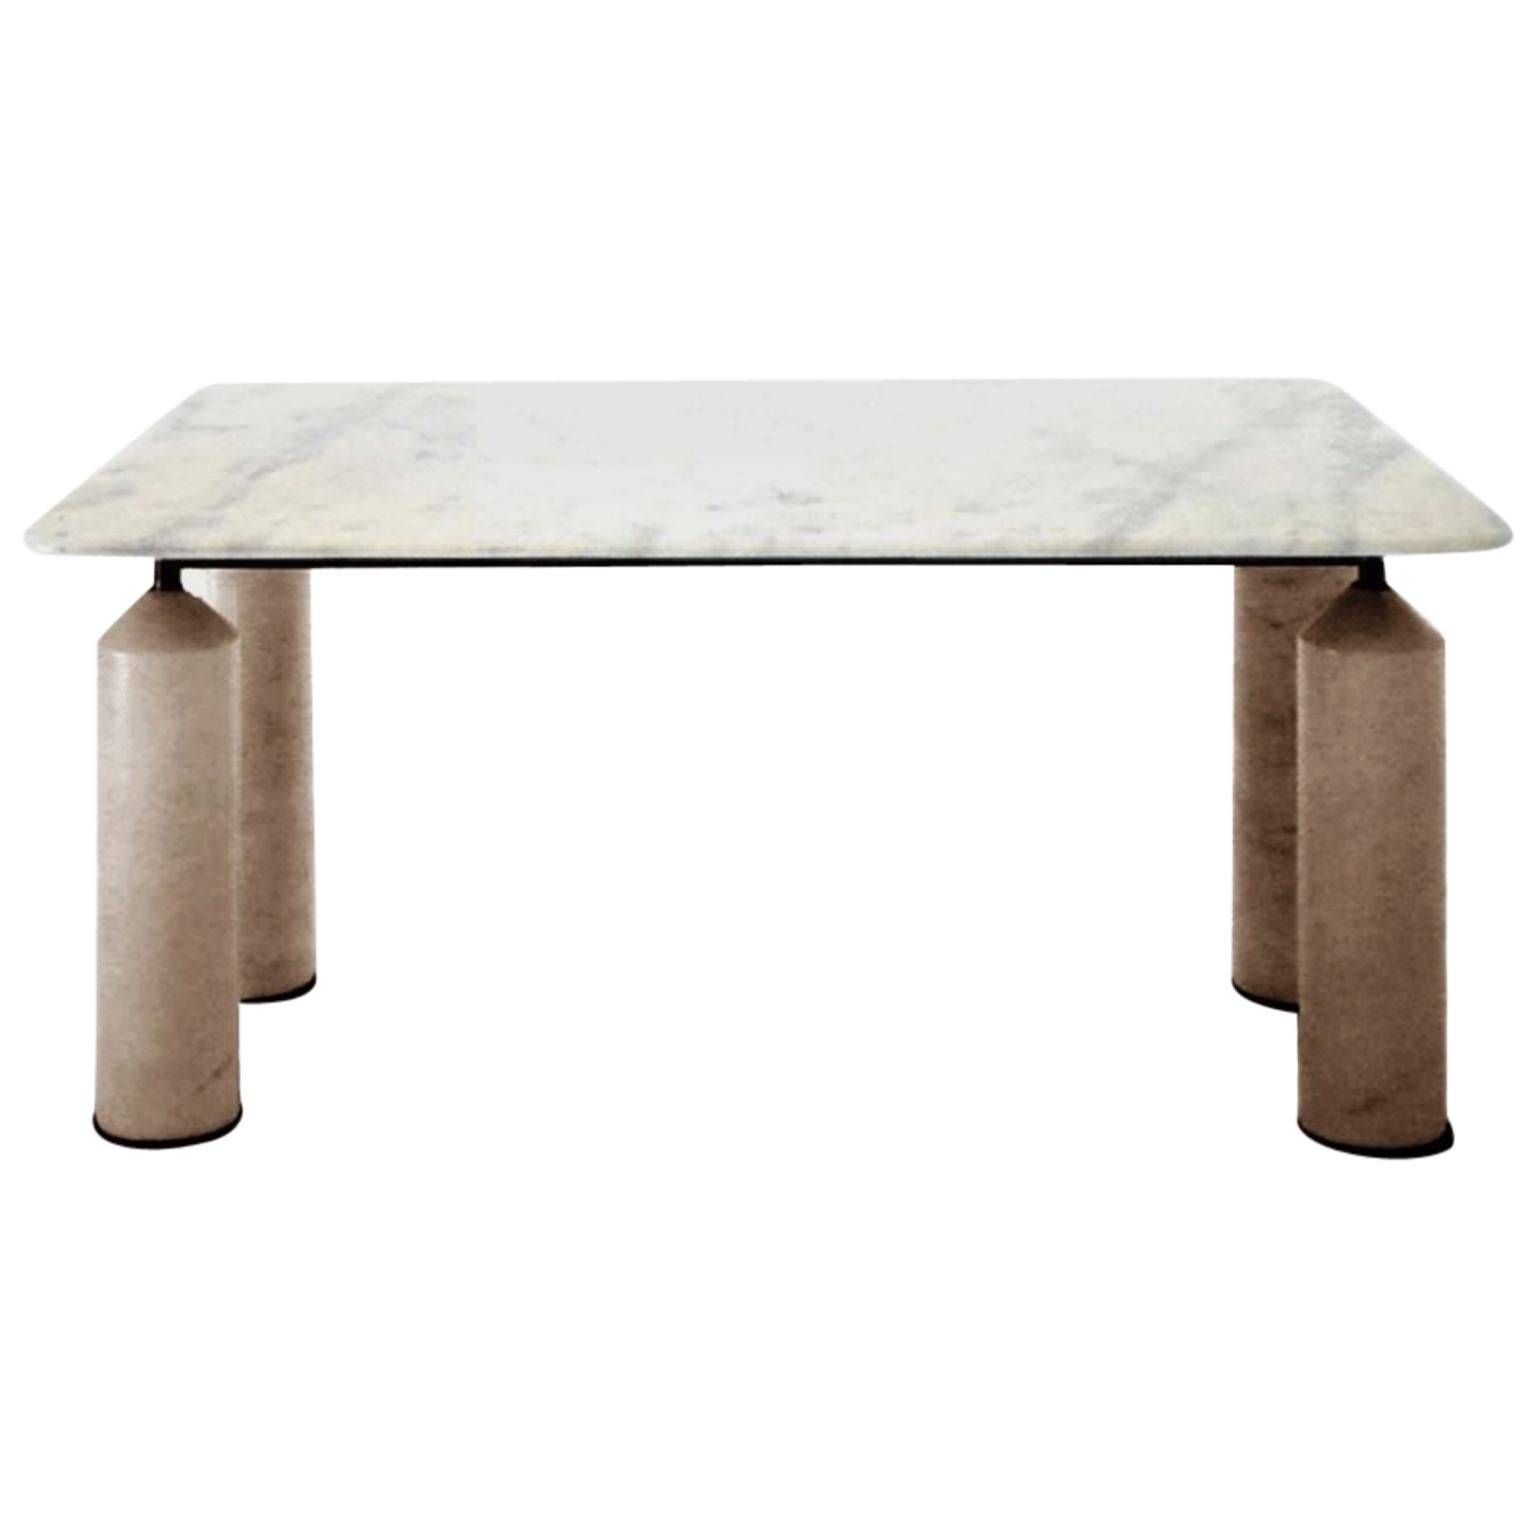 1981 Large Square Dining Table White Marble and Travertine, Sormani, Italy